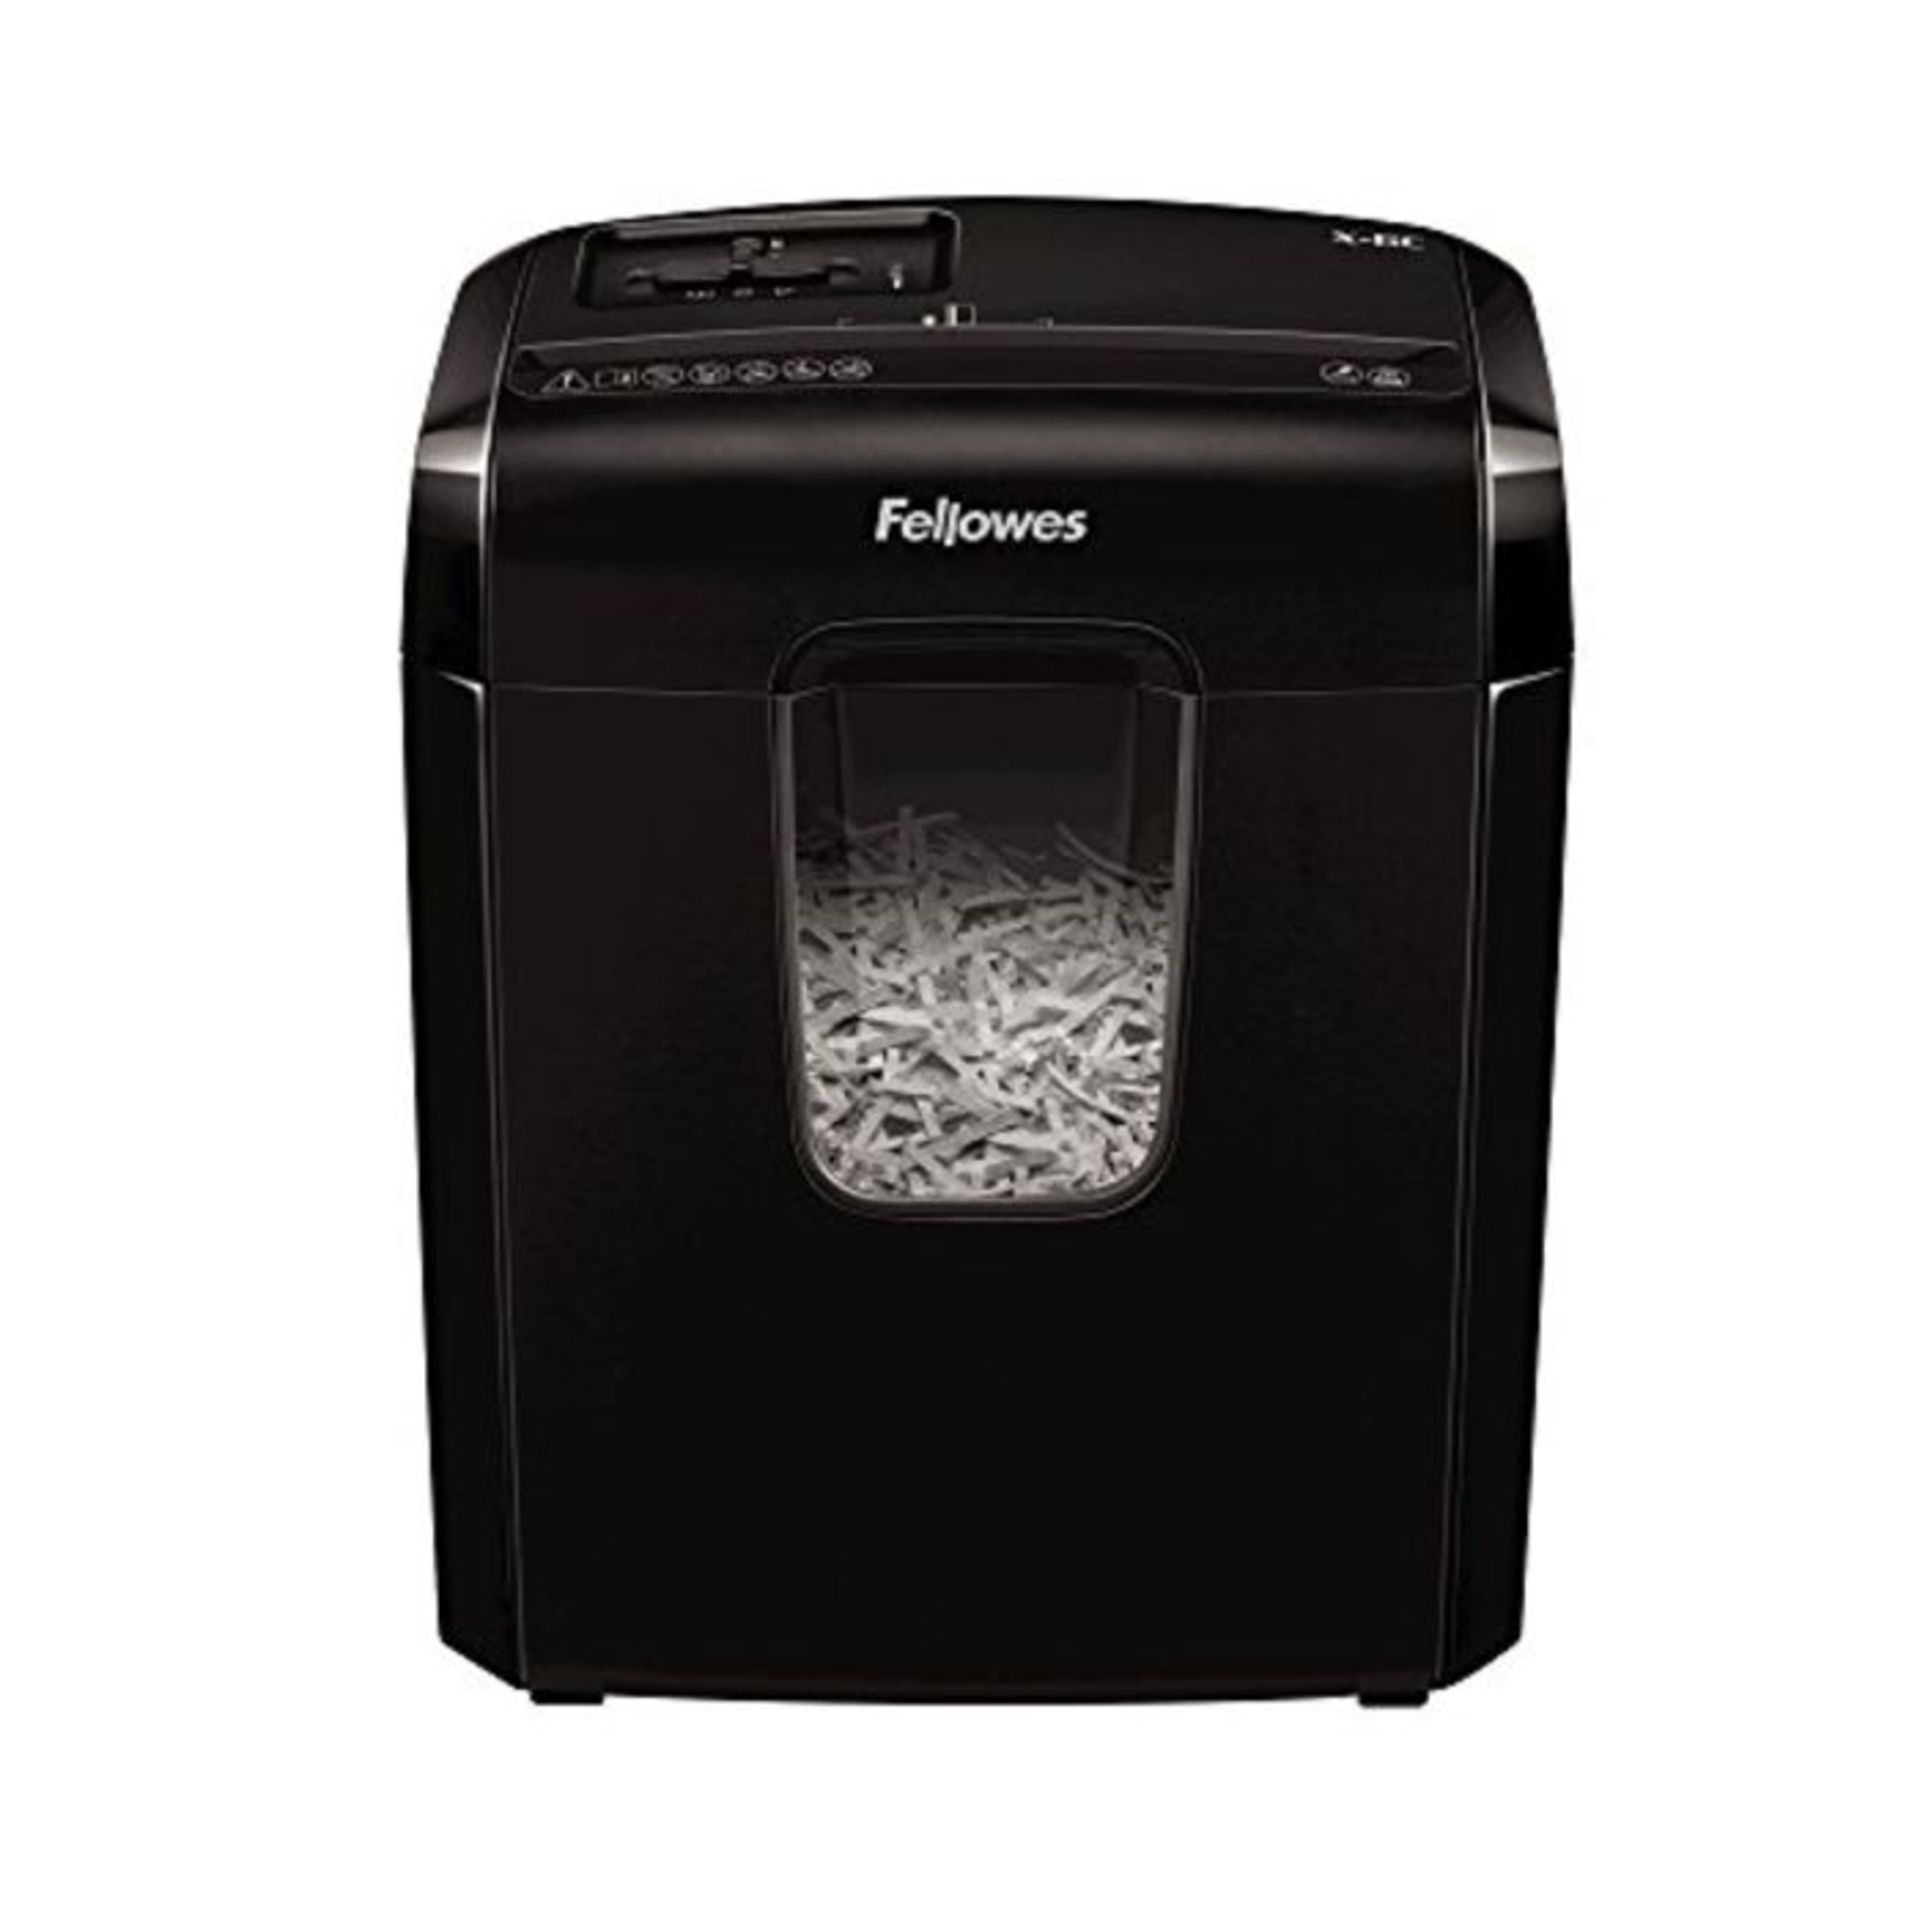 Fellowes Powershred X-6C Personal 6 Sheet Cross Cut Paper Shredder for Home Use - Excl